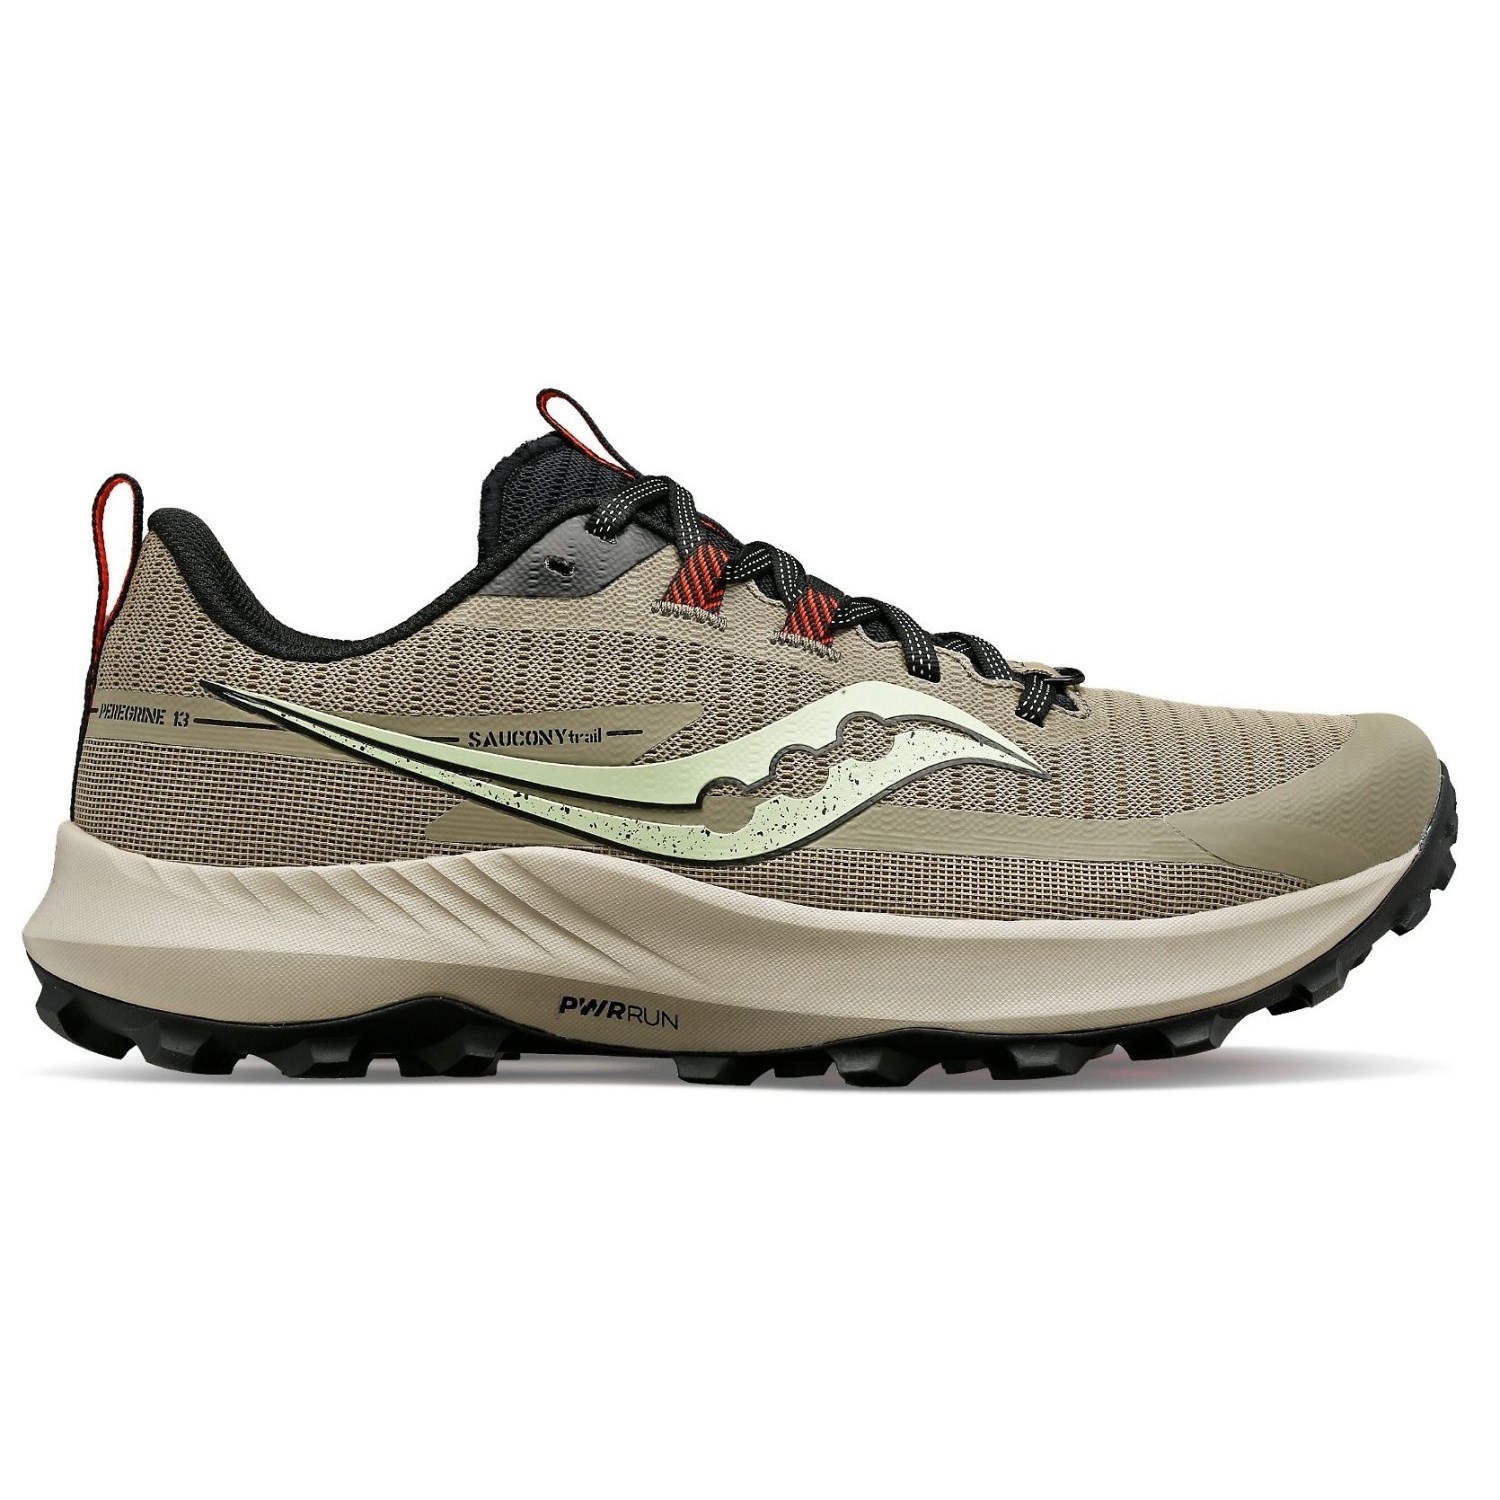 Saucony Peregrine 13 - Mens Trail Running Shoes - Coffee/Black | Sportitude